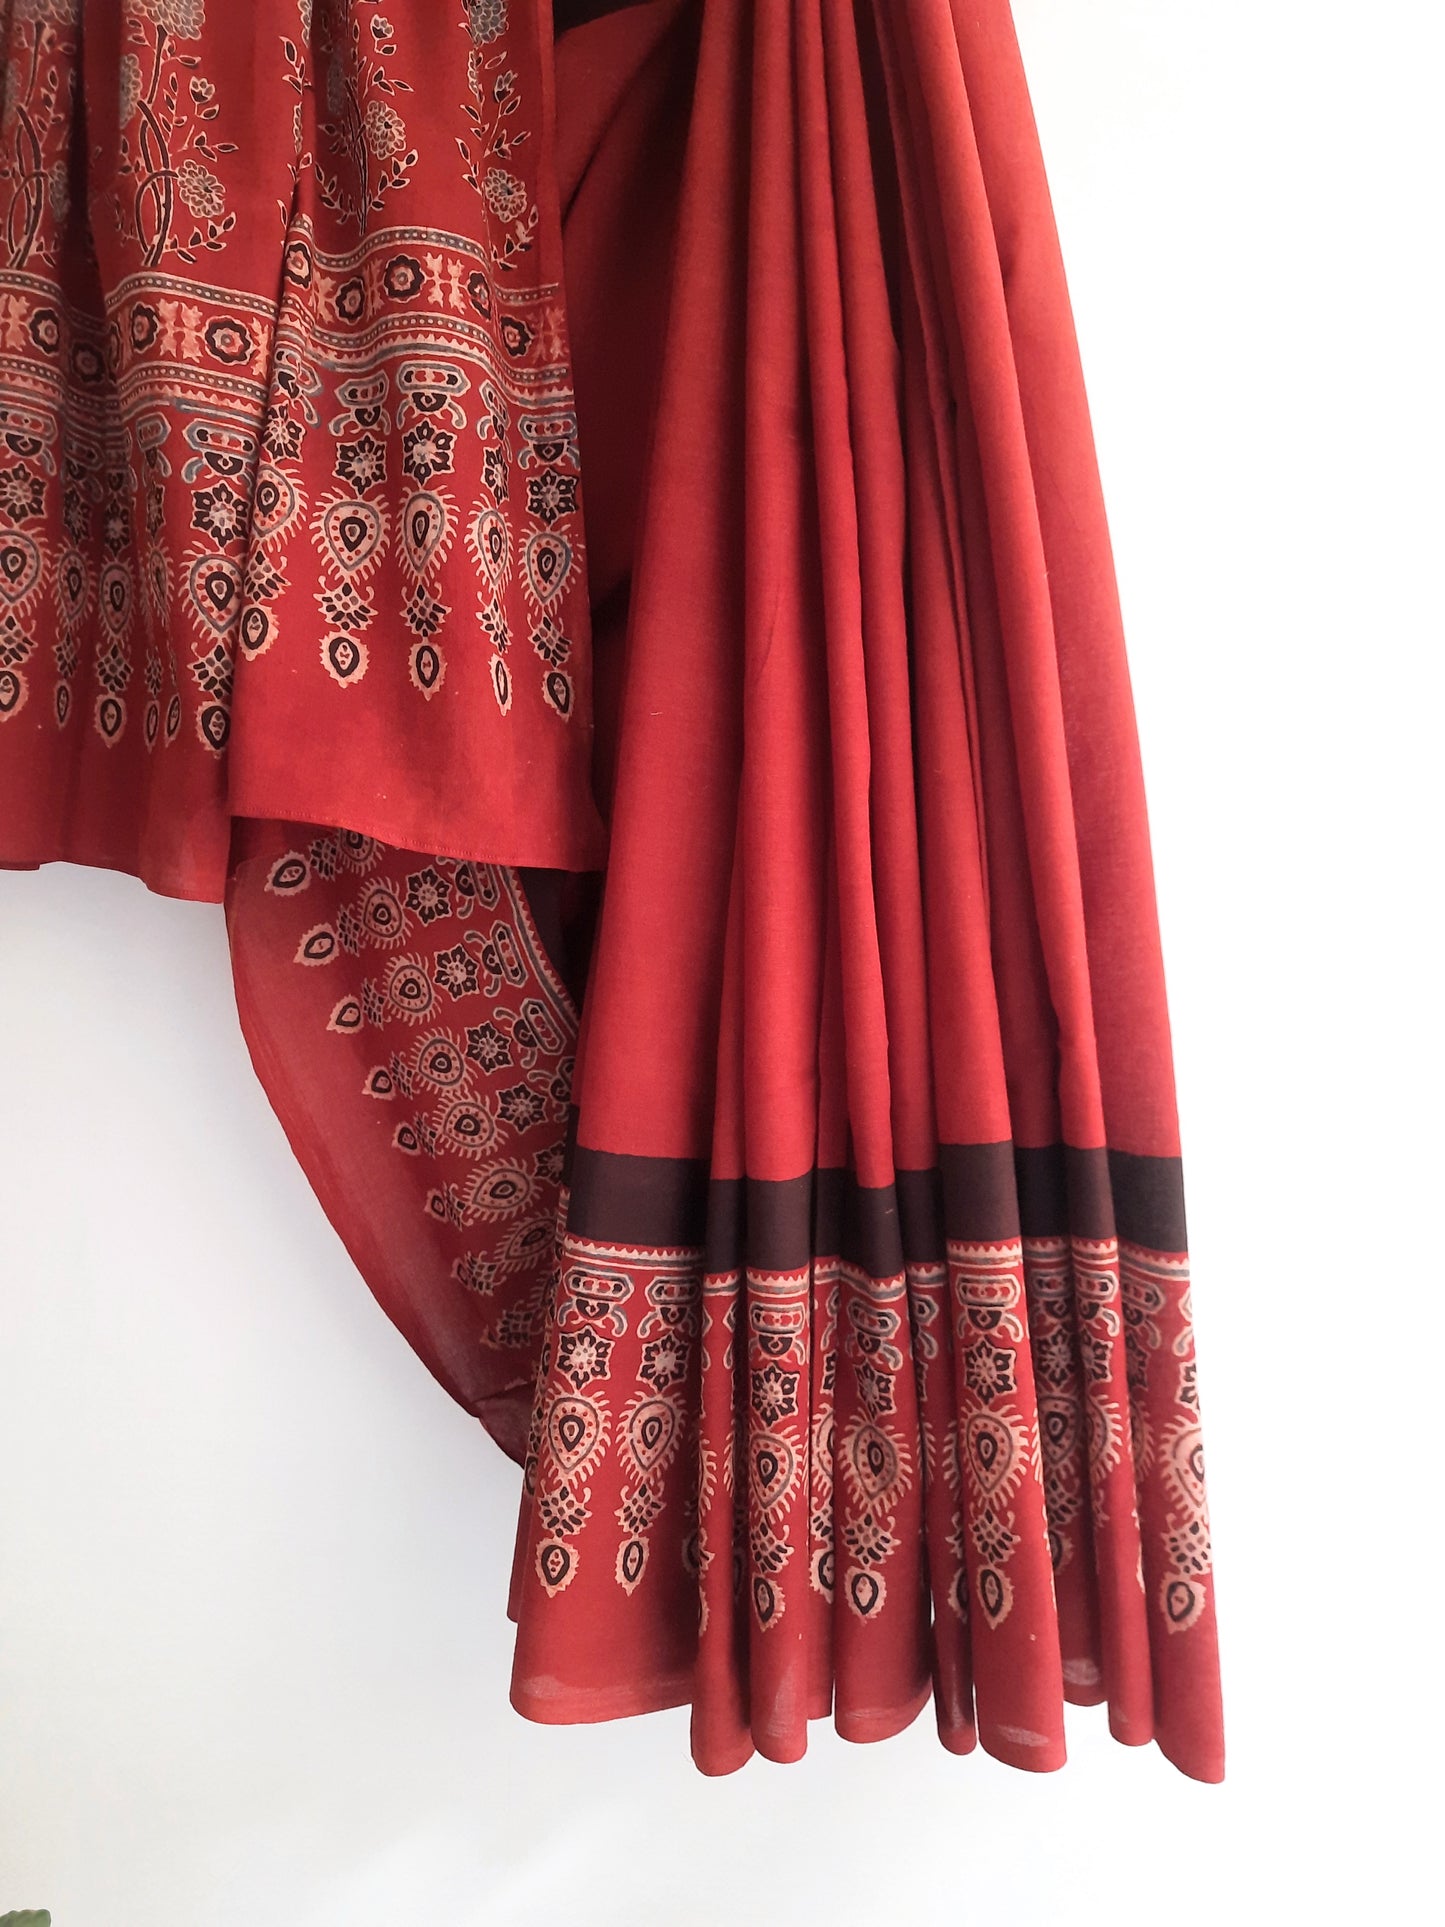 Ajrakh hand block print pure cotton saree dyed in vibrant madder hues, showcasing intricate traditional patterns.